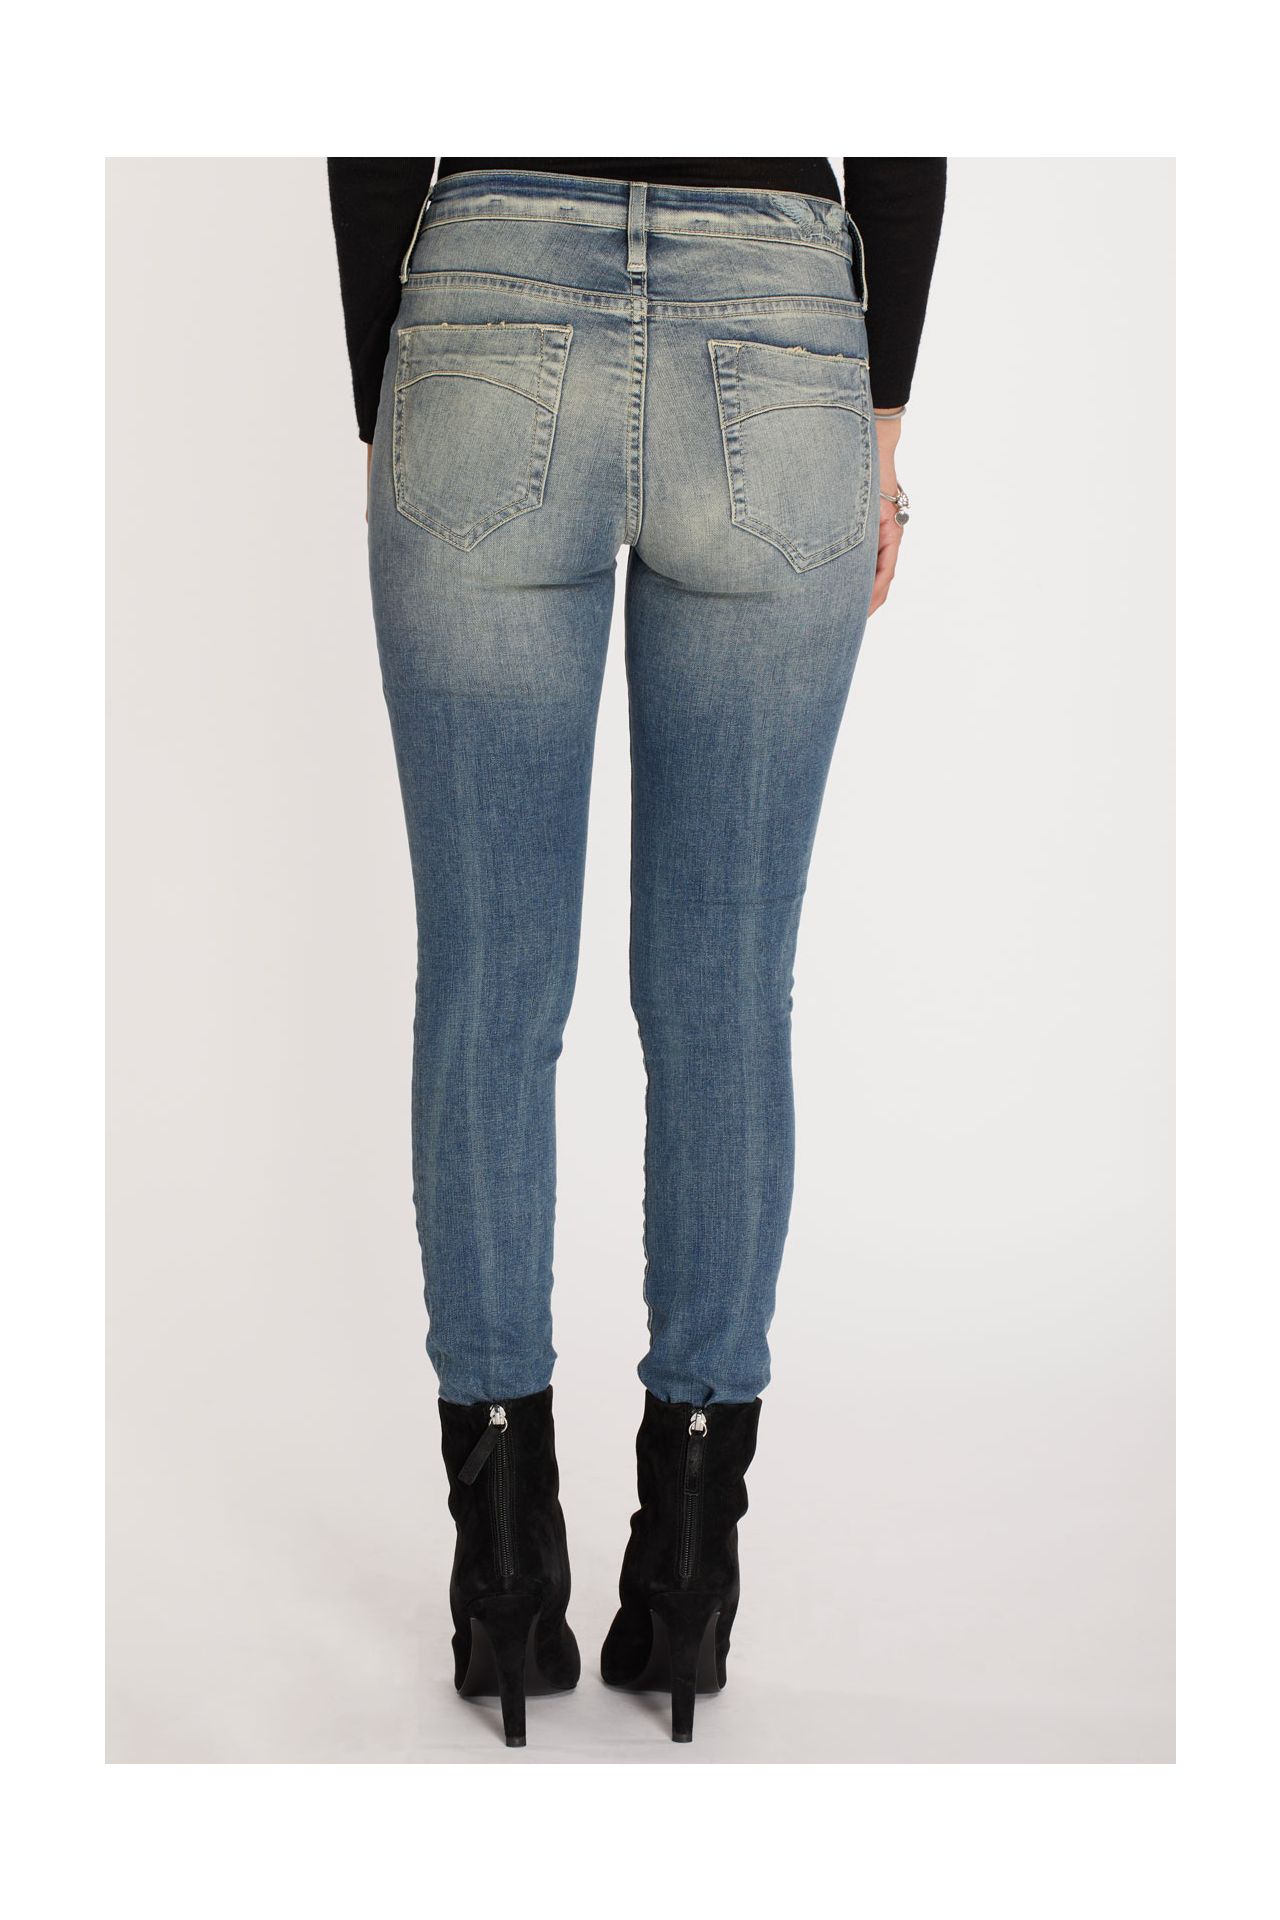 MIDRISE WOMENS SKINNY JEANS IN RIPPED BLUE WASH